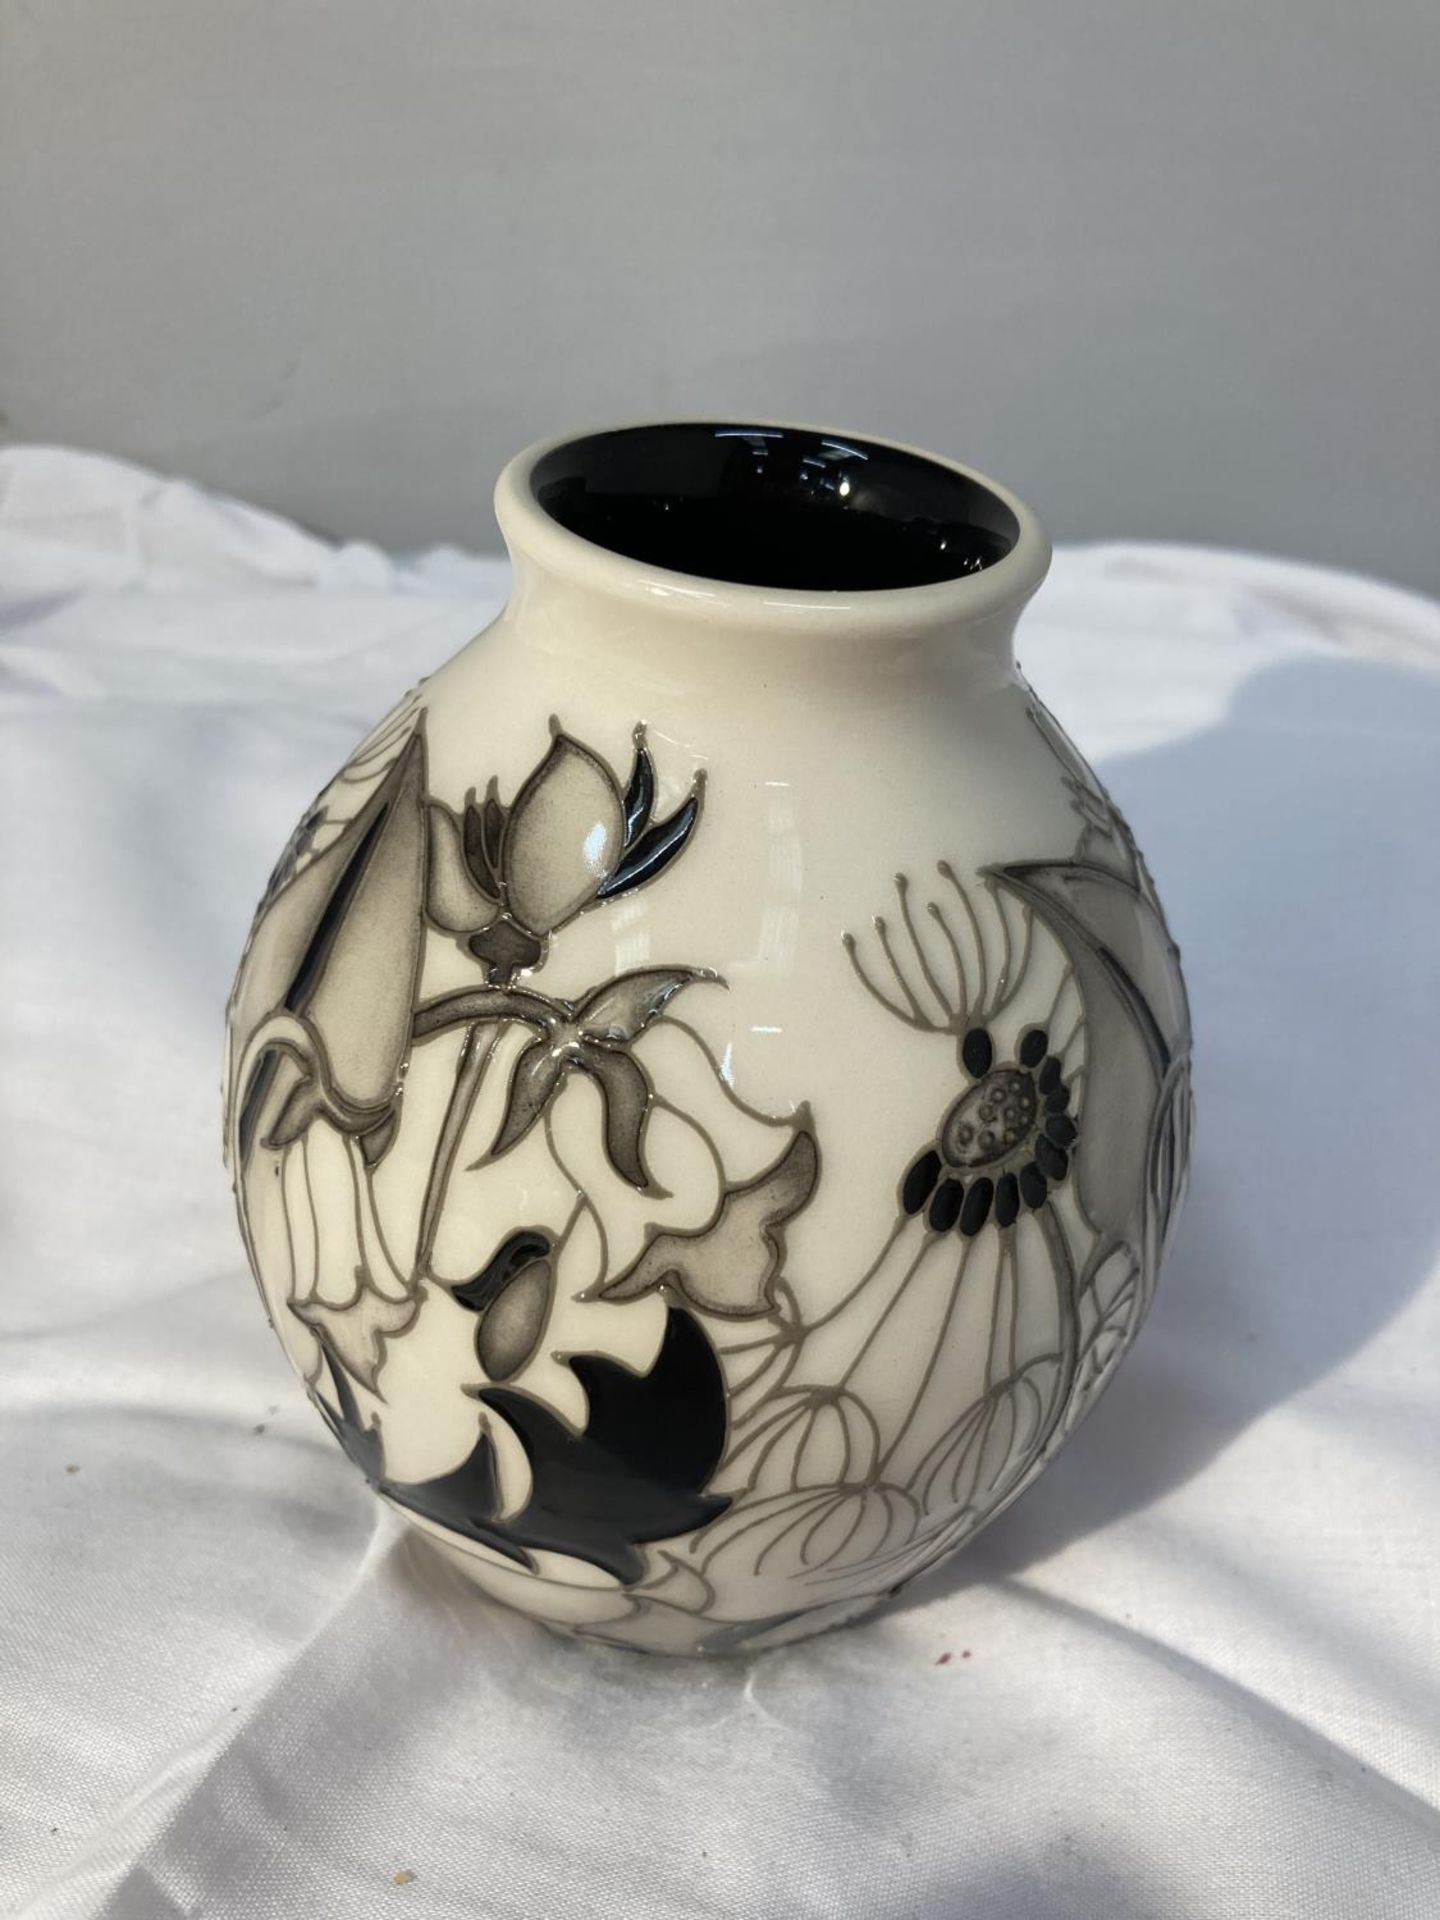 A MOORCROFT TRIAL VASE 6/11/18 BLACKTHORN 5 INCHES TALL - Image 4 of 5